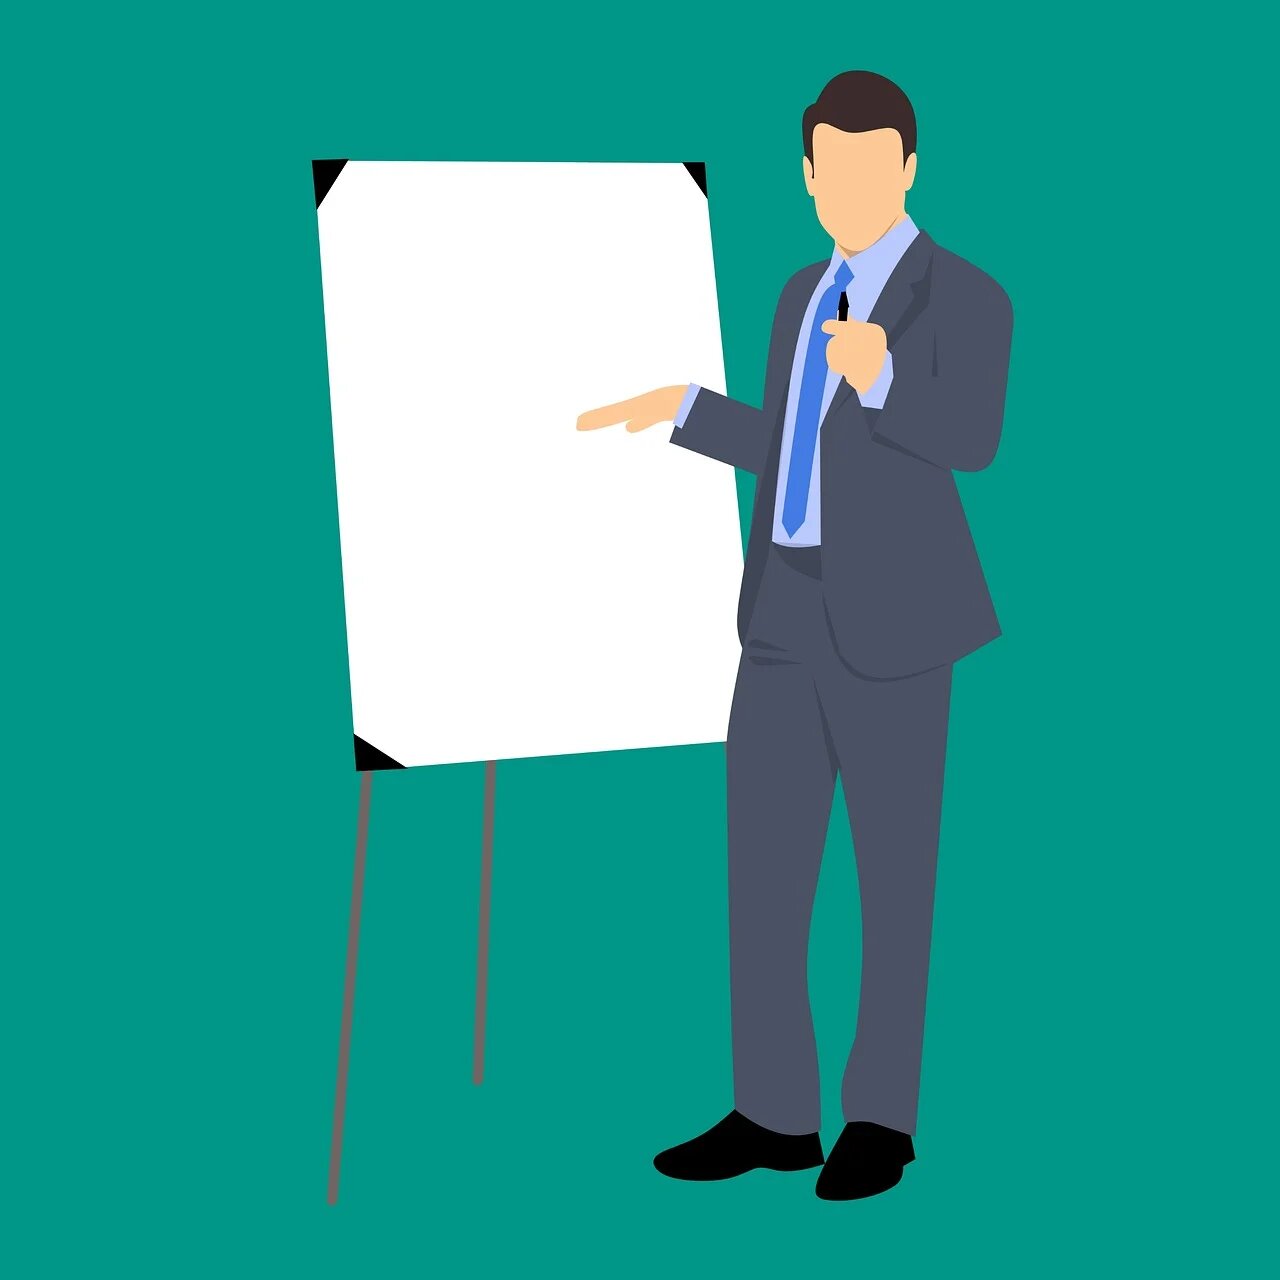 Key Benefits of Having Flip Chart Stand & Board for Office - WelfulloutDoors.com